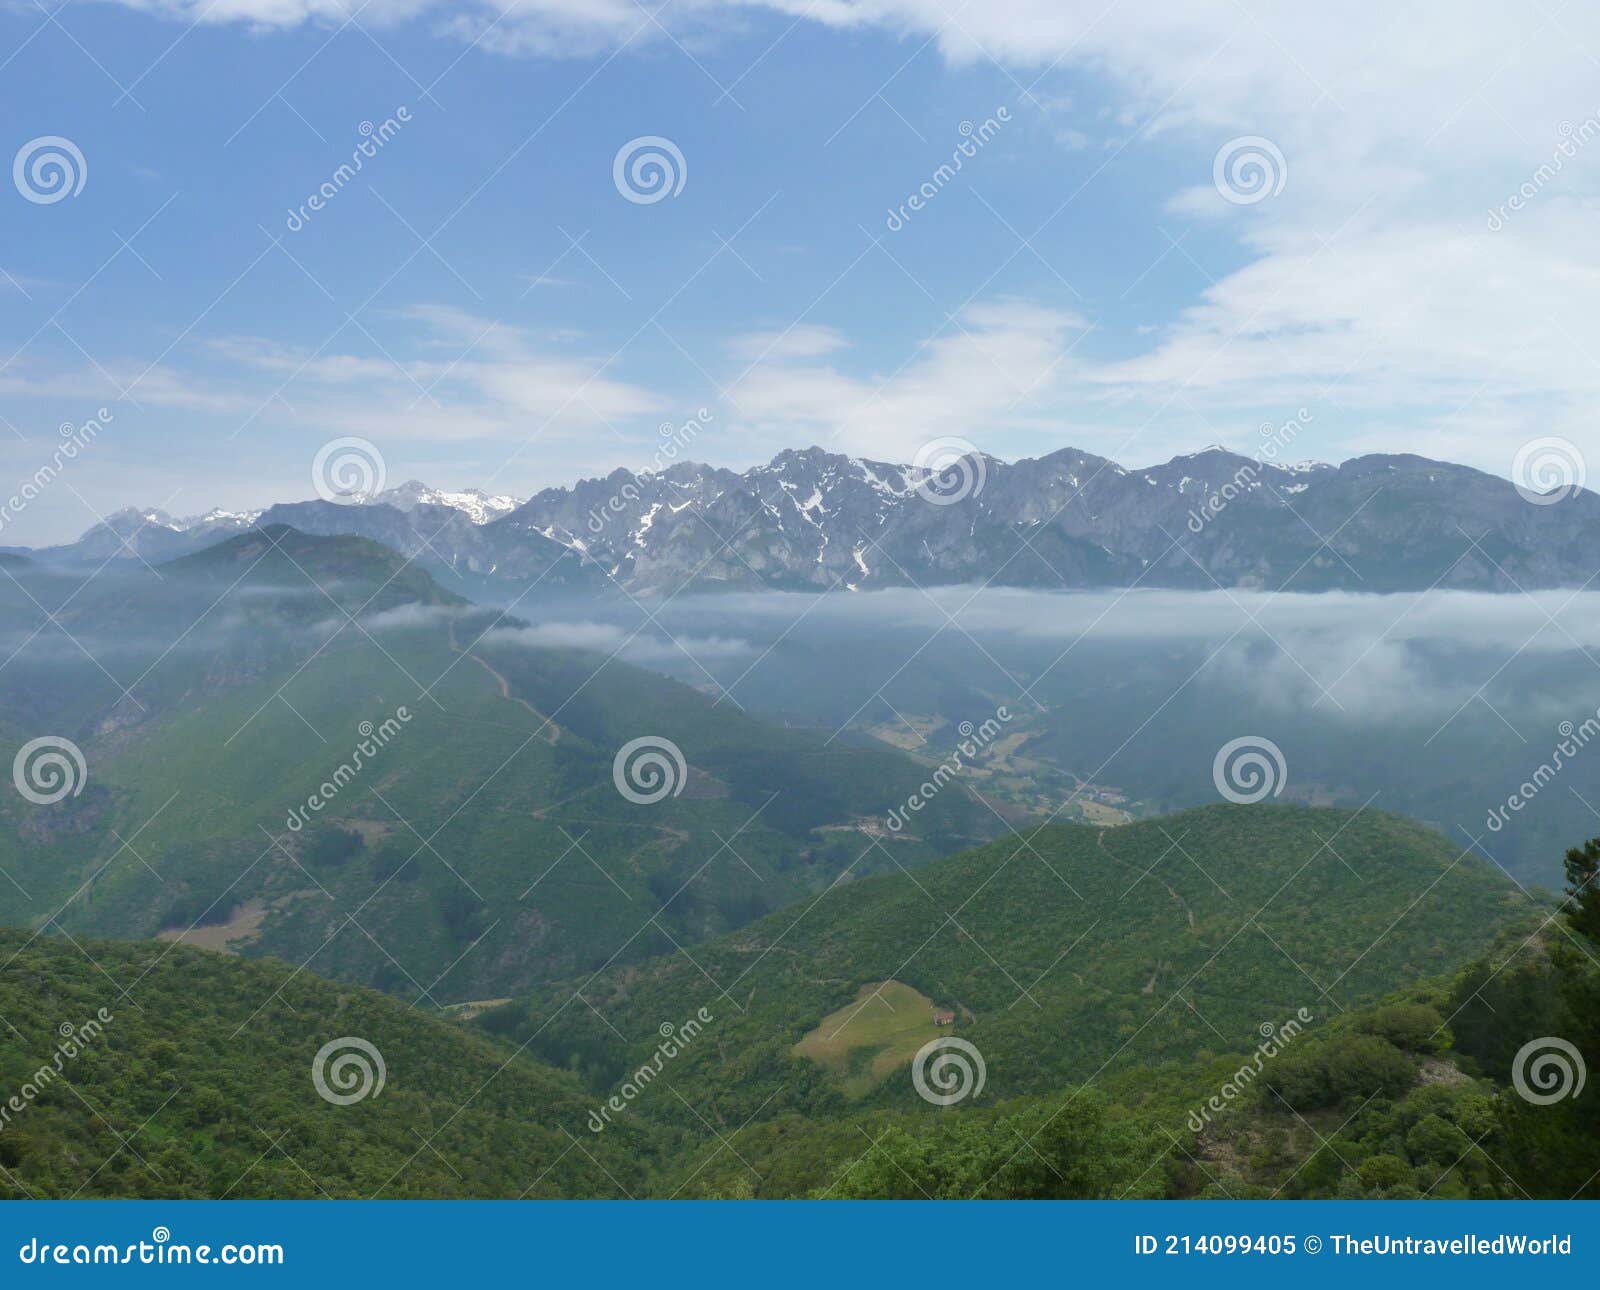 a view of the central mountains of the picos de europa national park